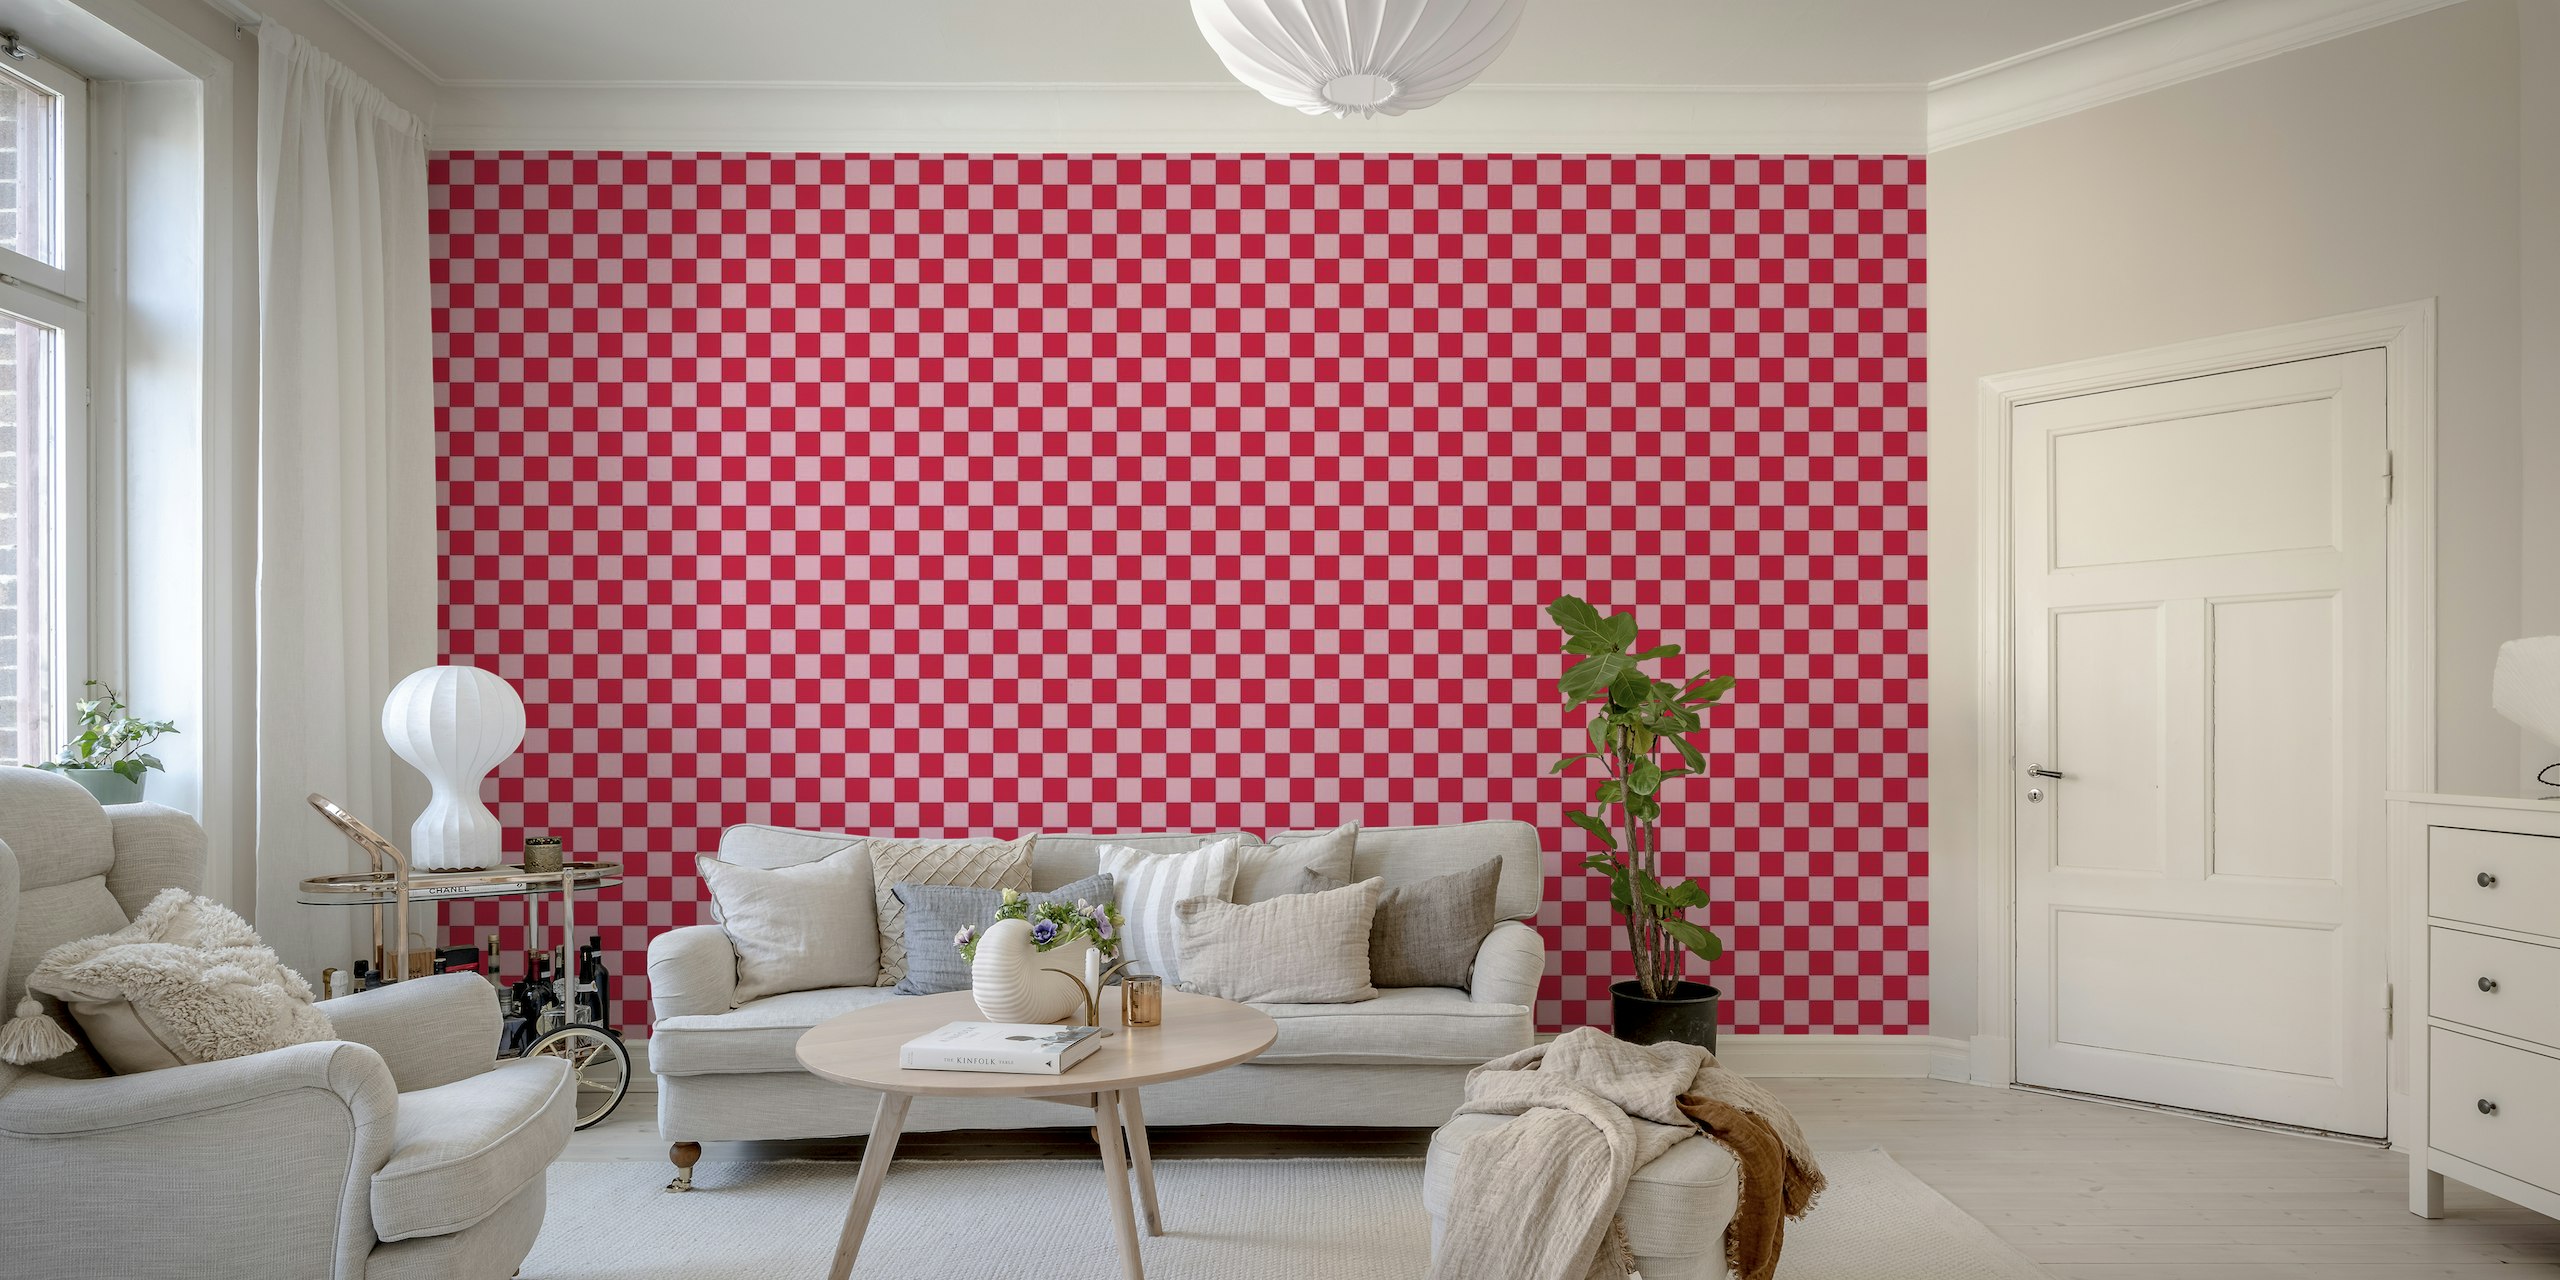 Checkerboard - Pink and Red papel pintado